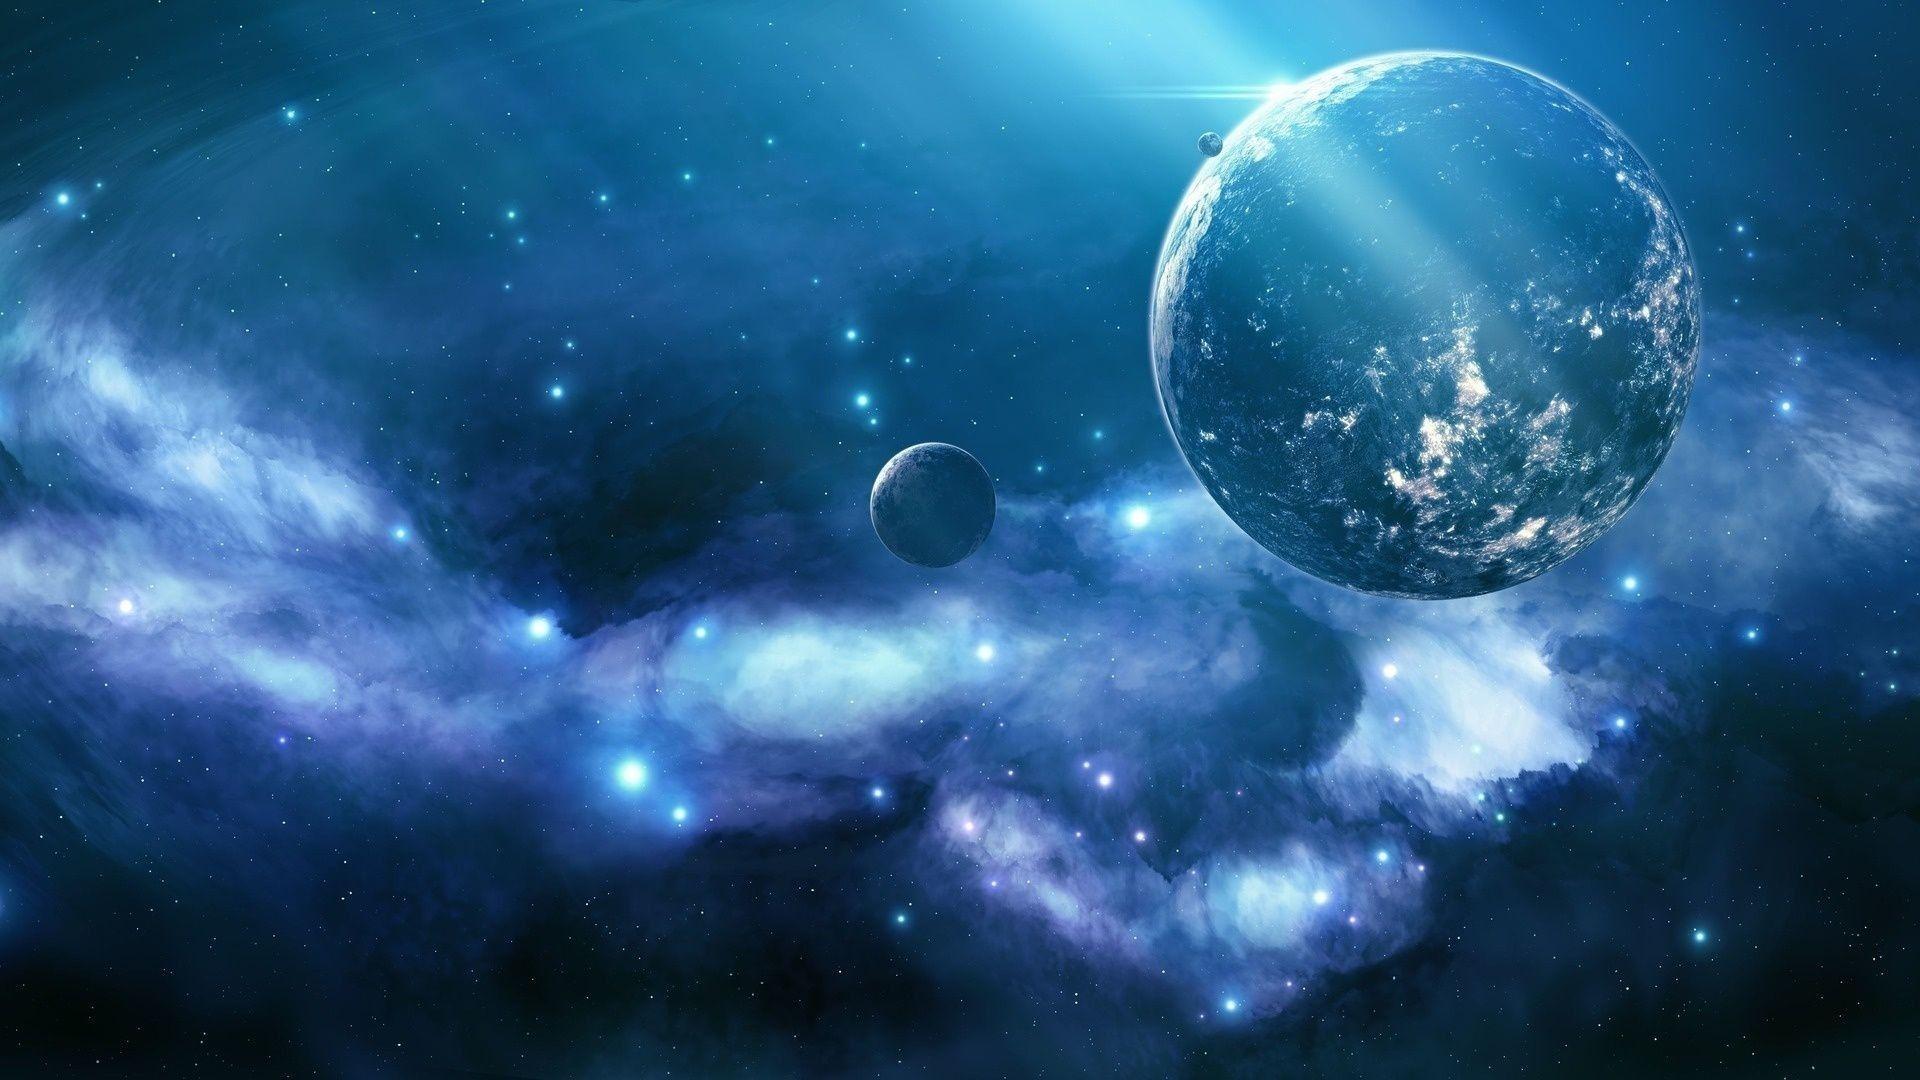 Space Galaxy Planets Stars Space Sci Fi 4k Ultra Hd Wallpaper For Android  Windows And Xbox 5120x2880 : Wallpapers13.com